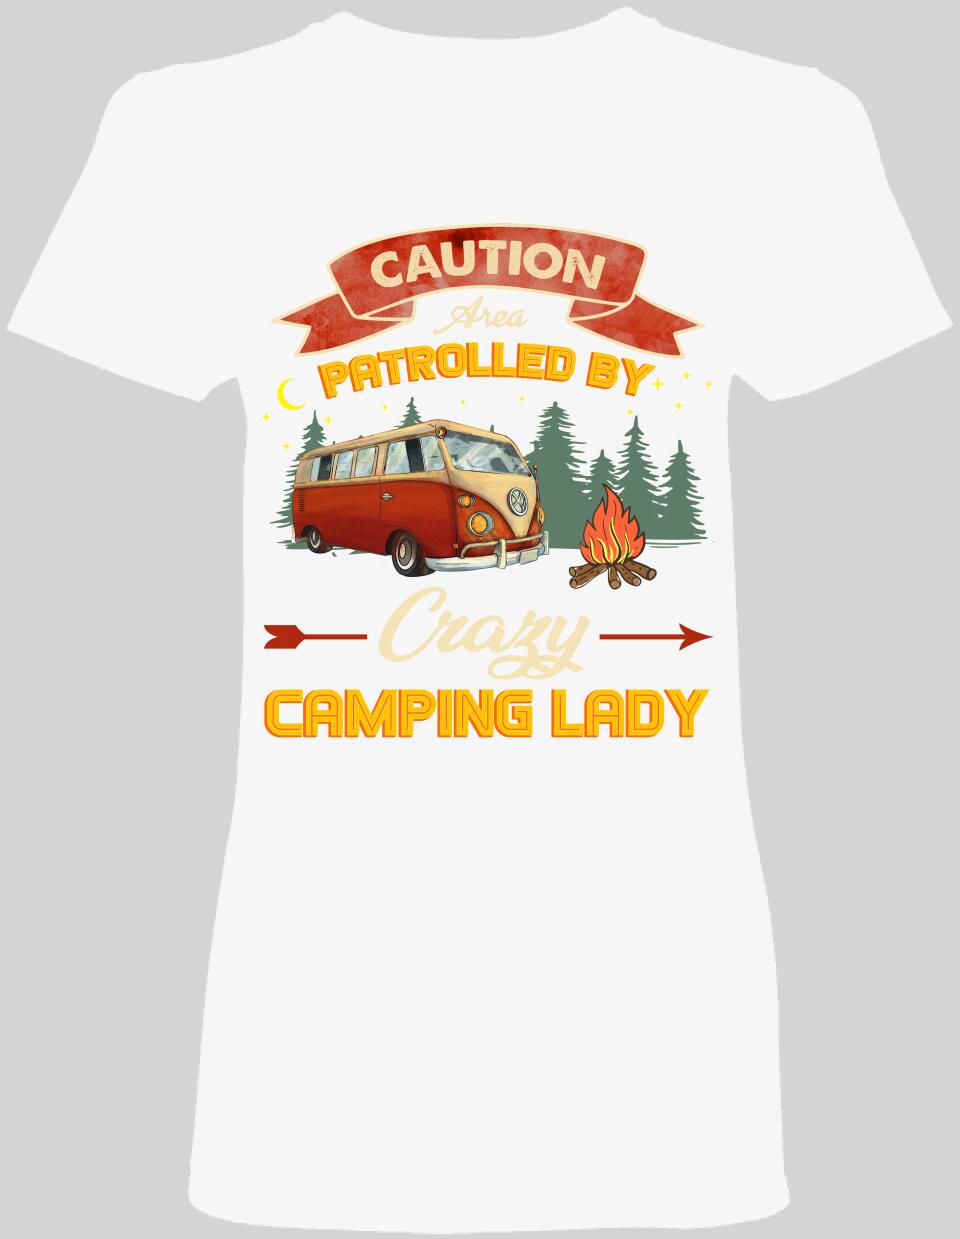 Caution Area Patrolled by Crazy Camping Lady - Ladies T-shirt